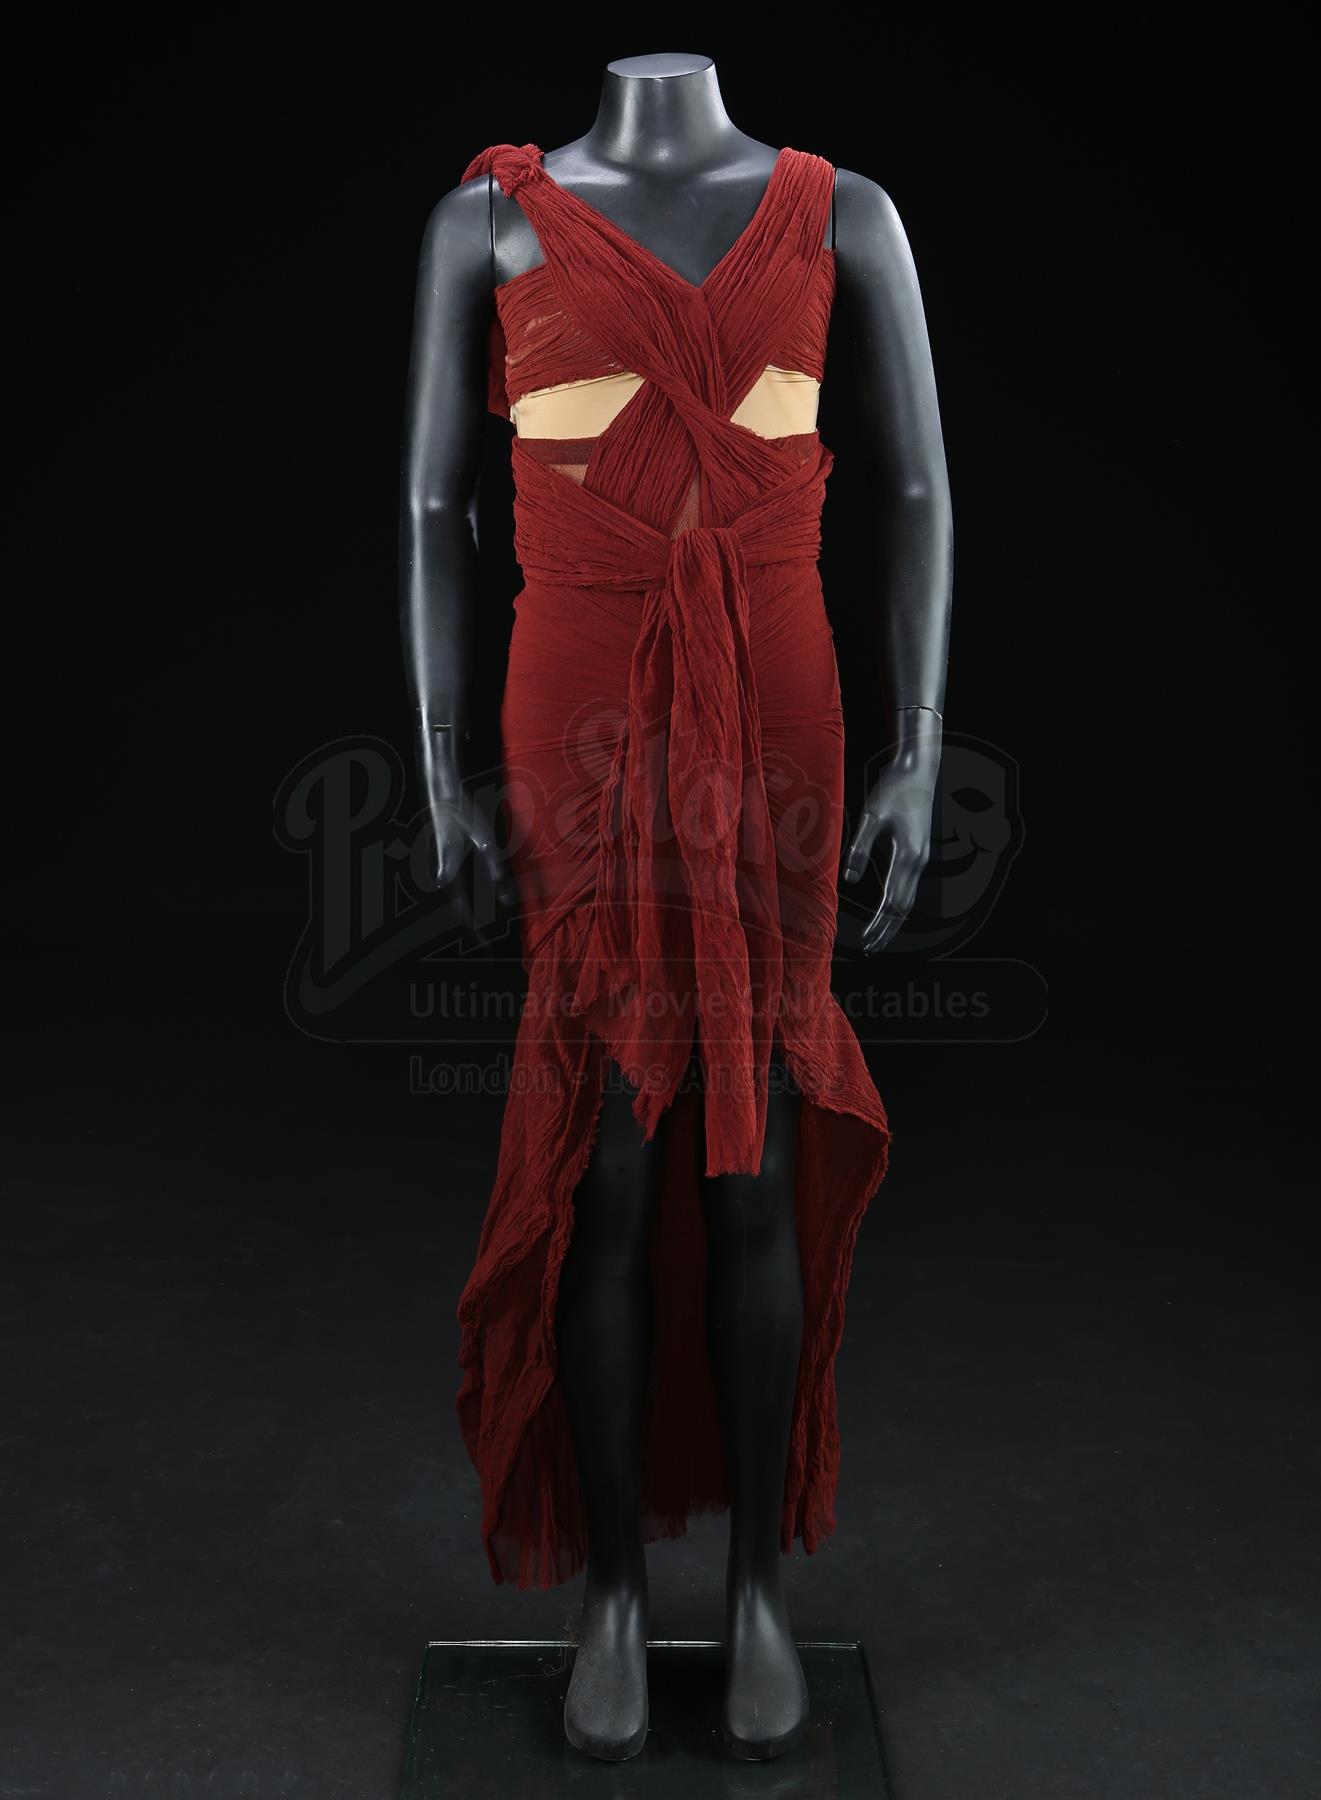 Mini Zaya's Red Afterlife Costume - Current price: $25